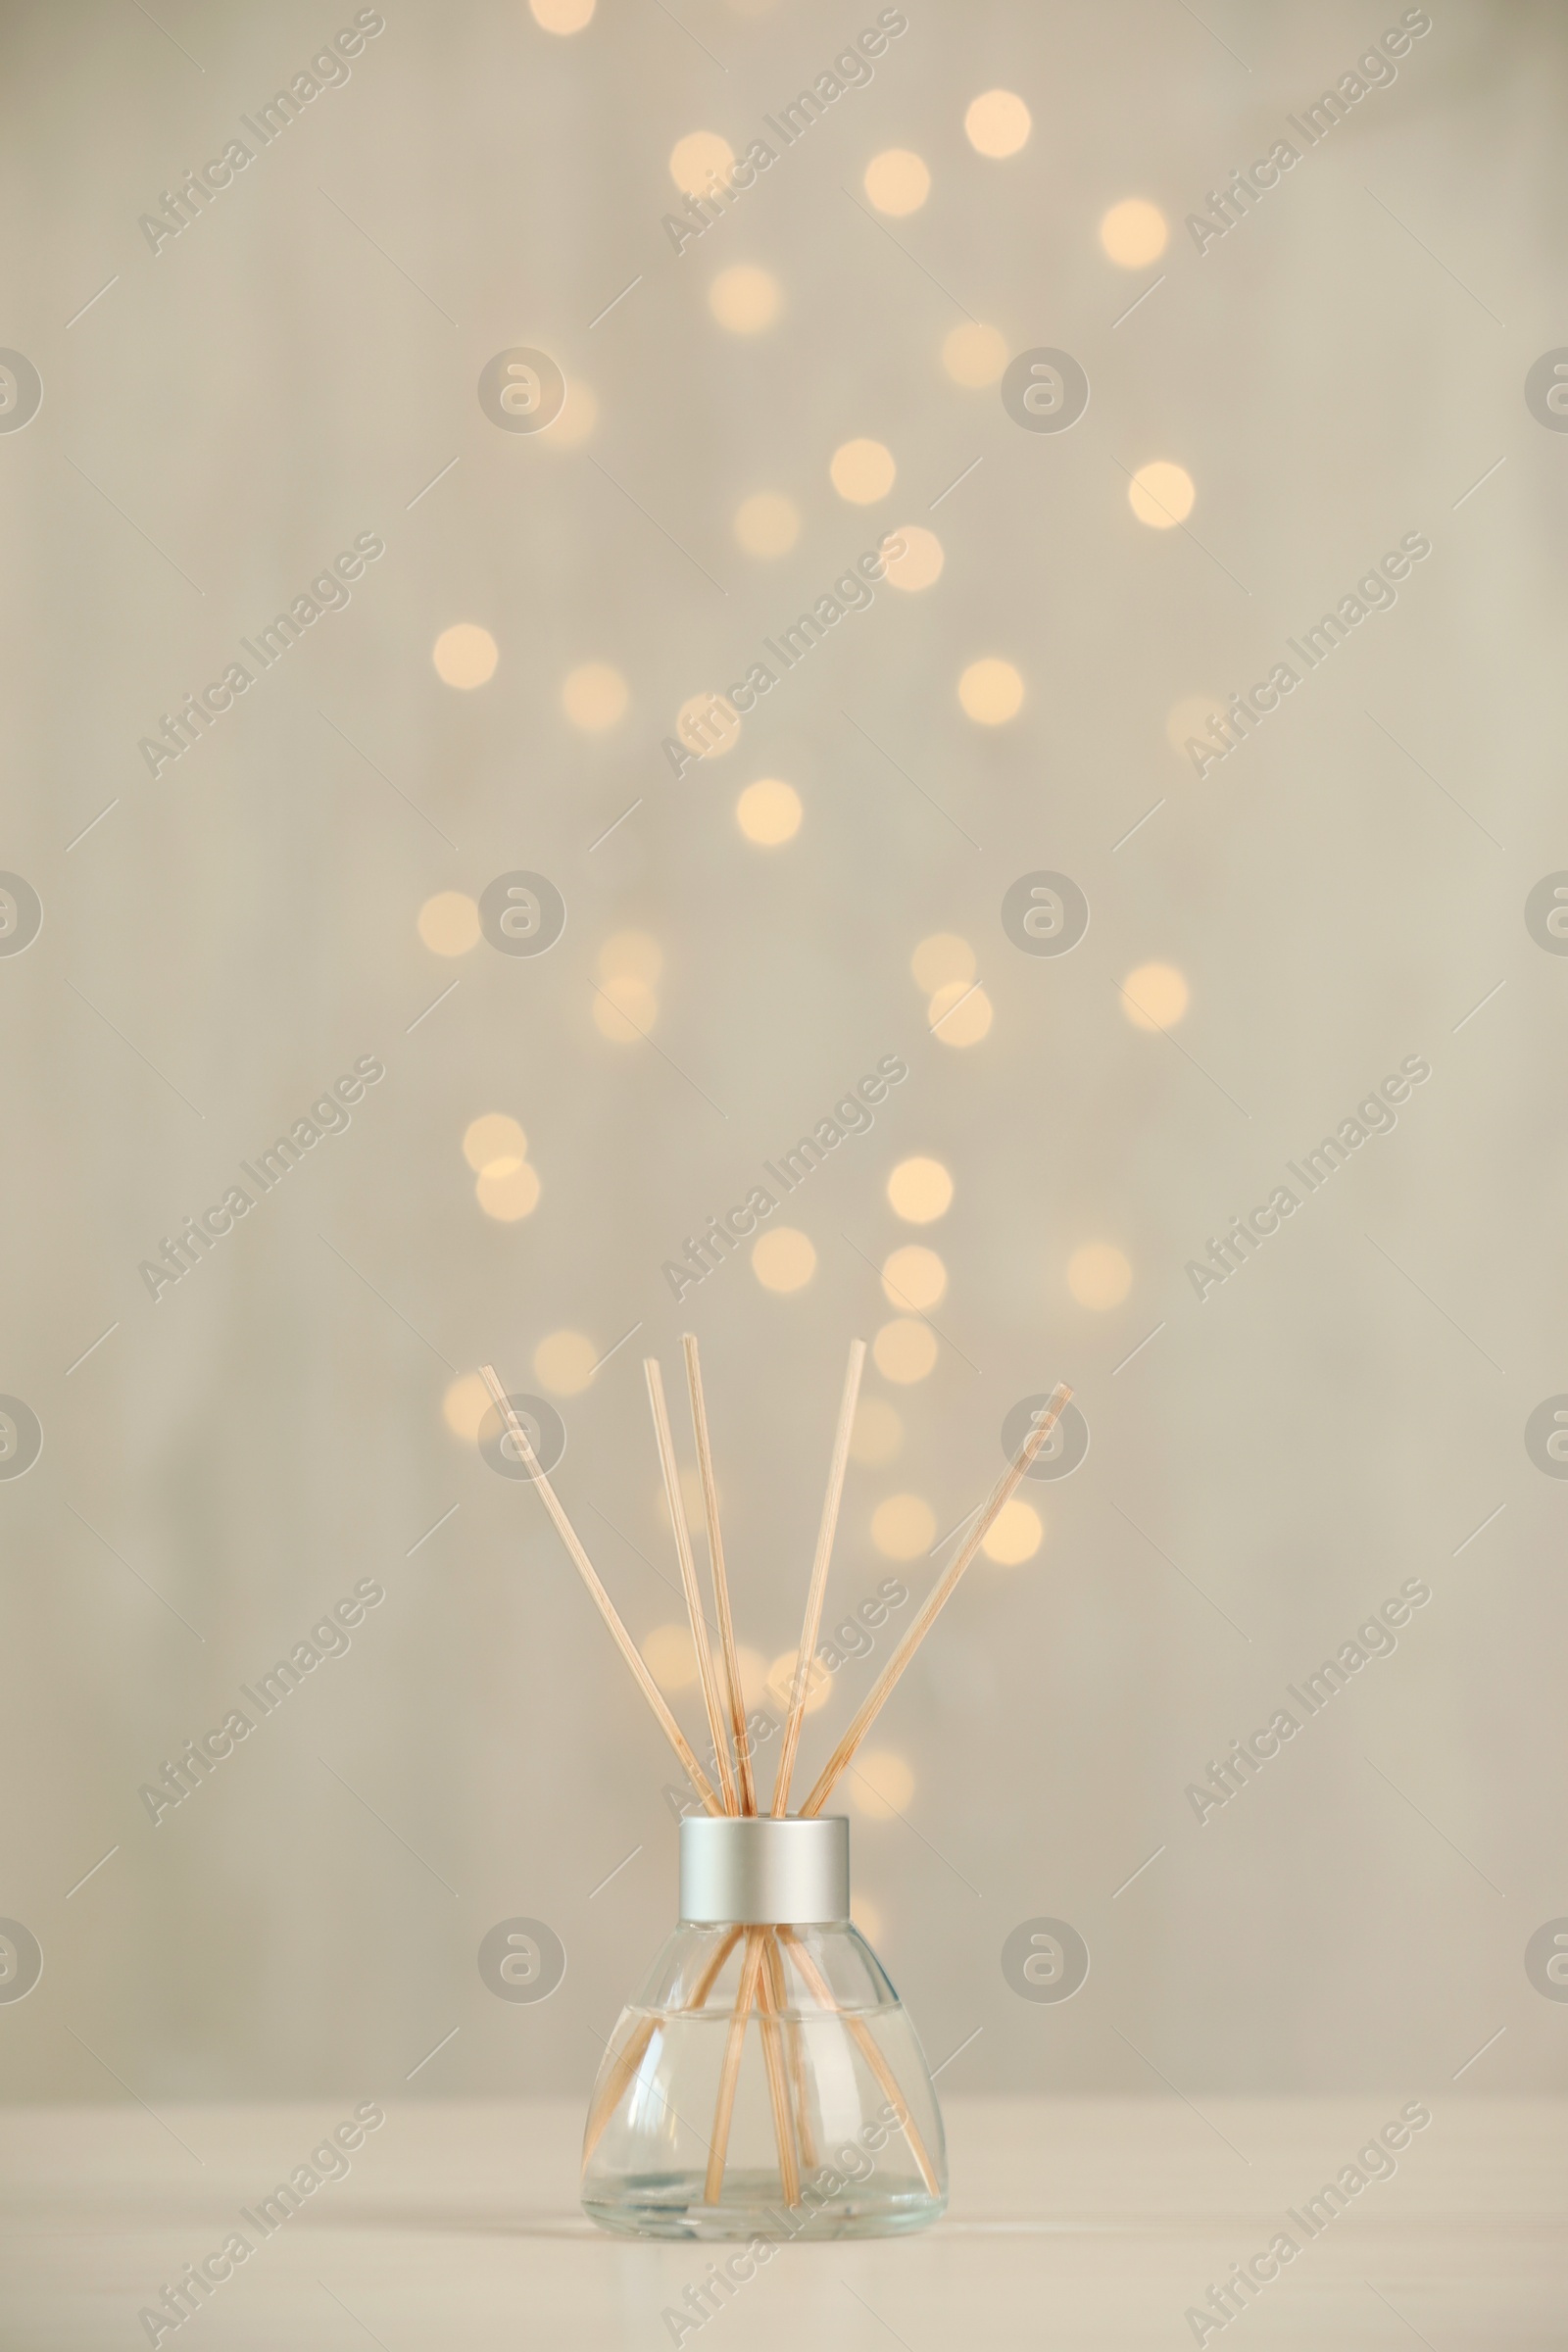 Photo of Aromatic reed air freshener on light table against blurred lights